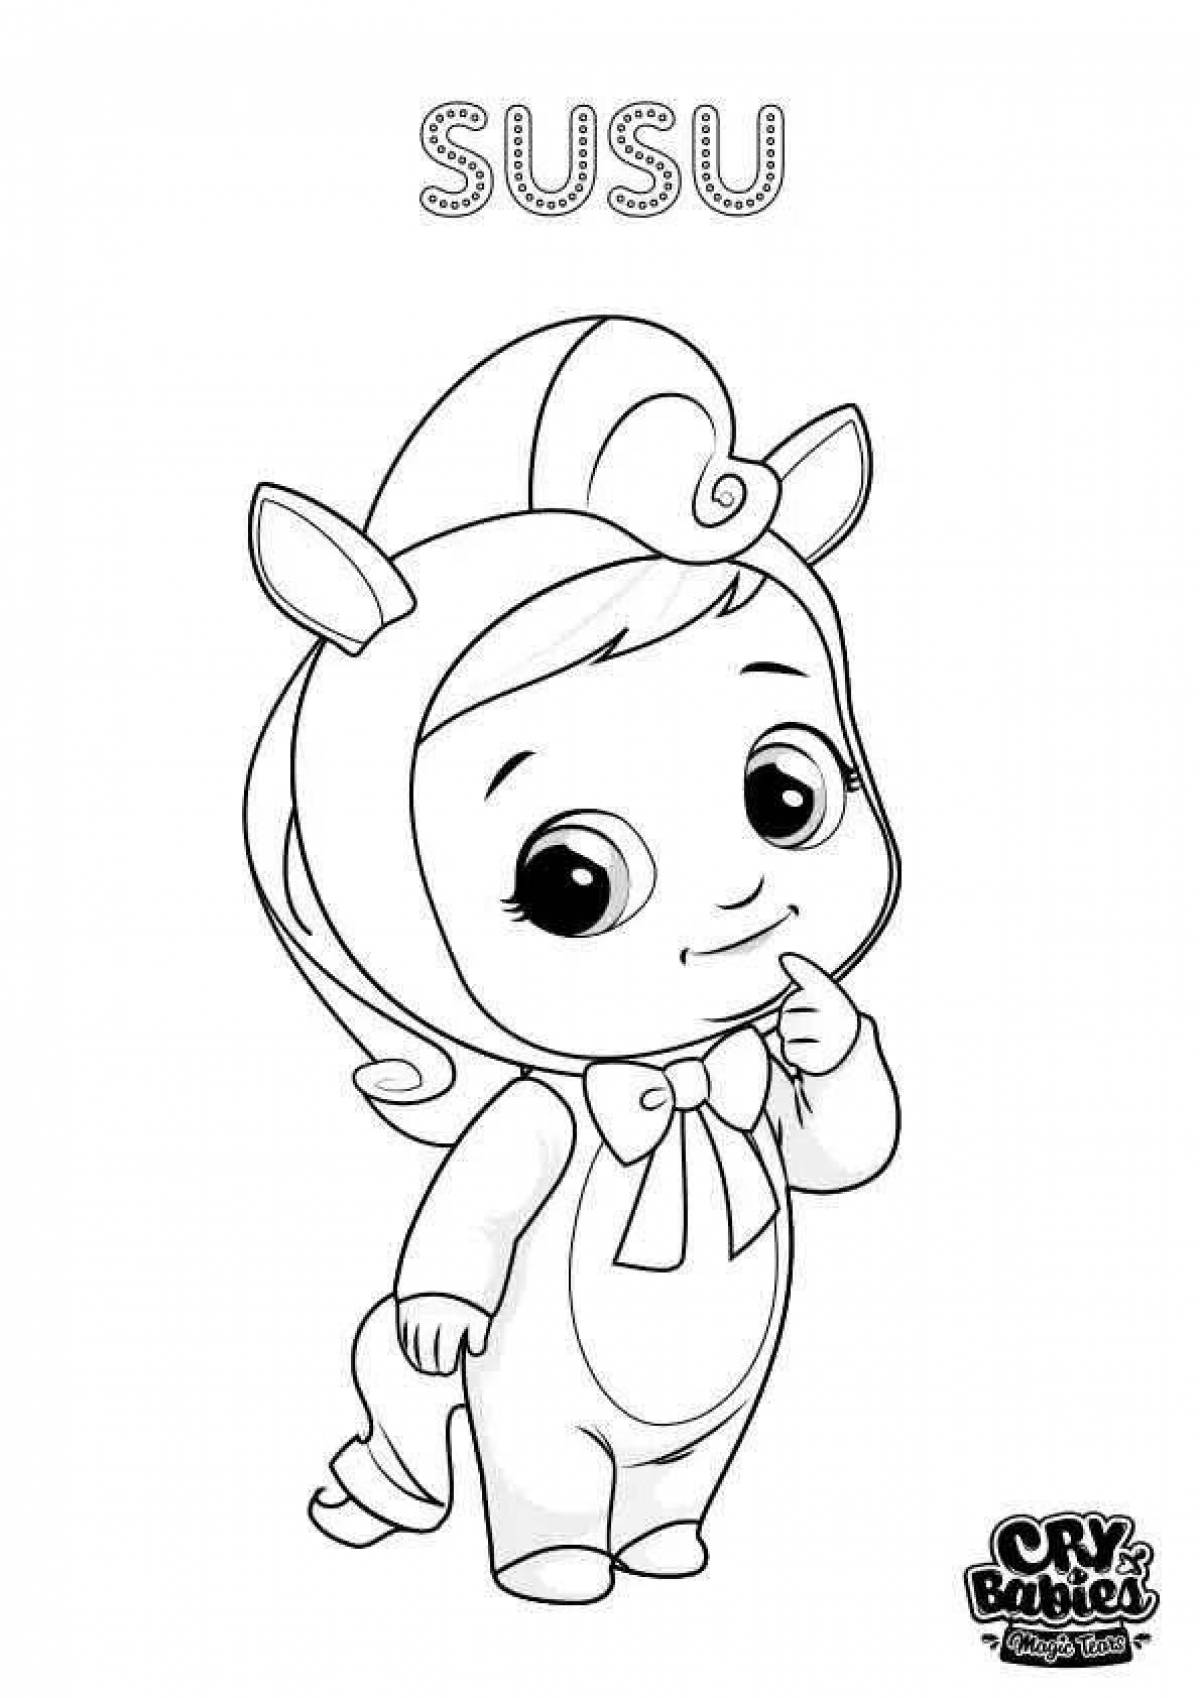 Coloring pages joyful crying babies